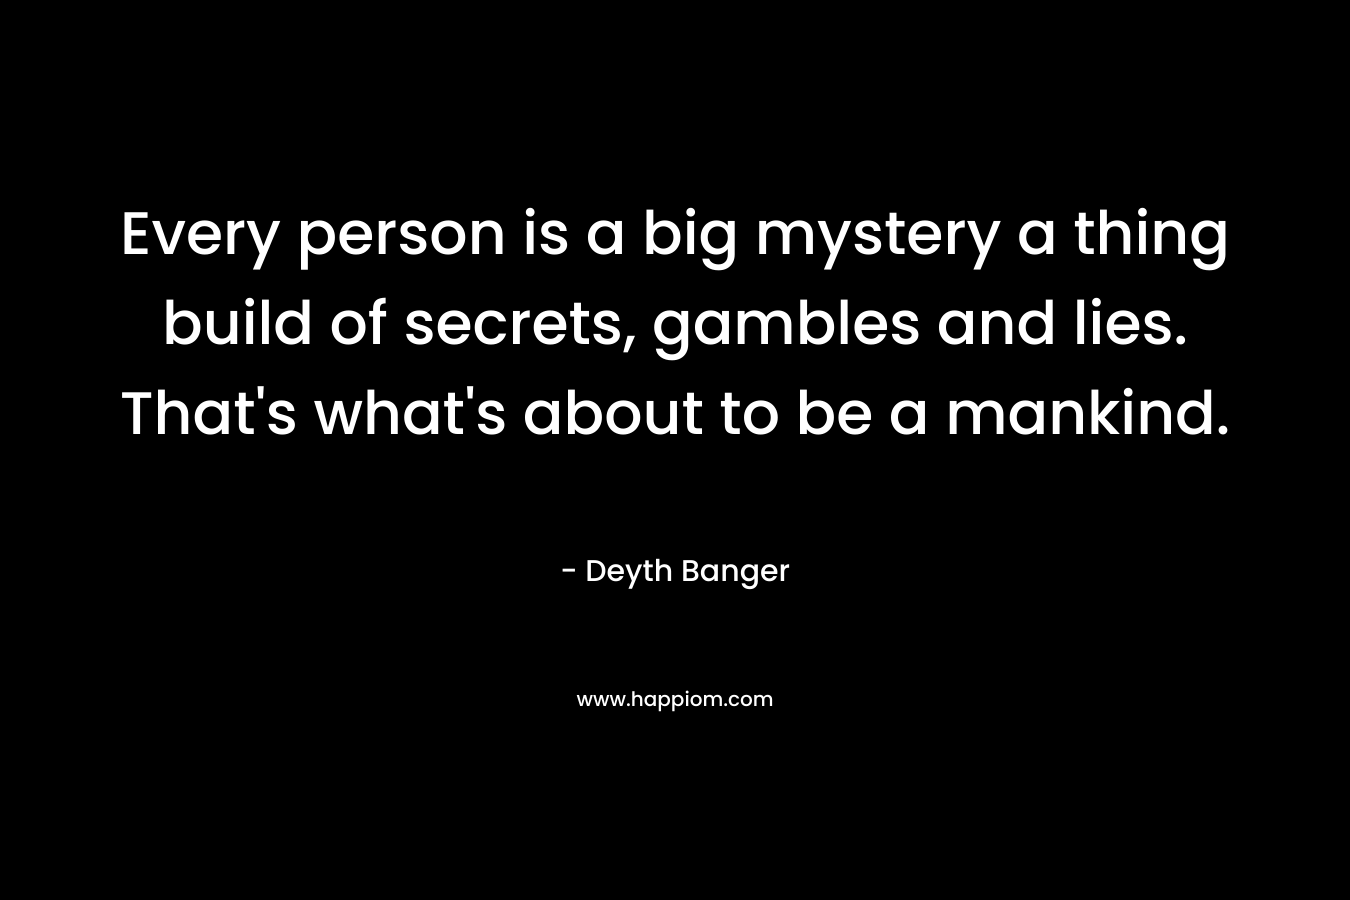 Every person is a big mystery a thing build of secrets, gambles and lies. That's what's about to be a mankind.